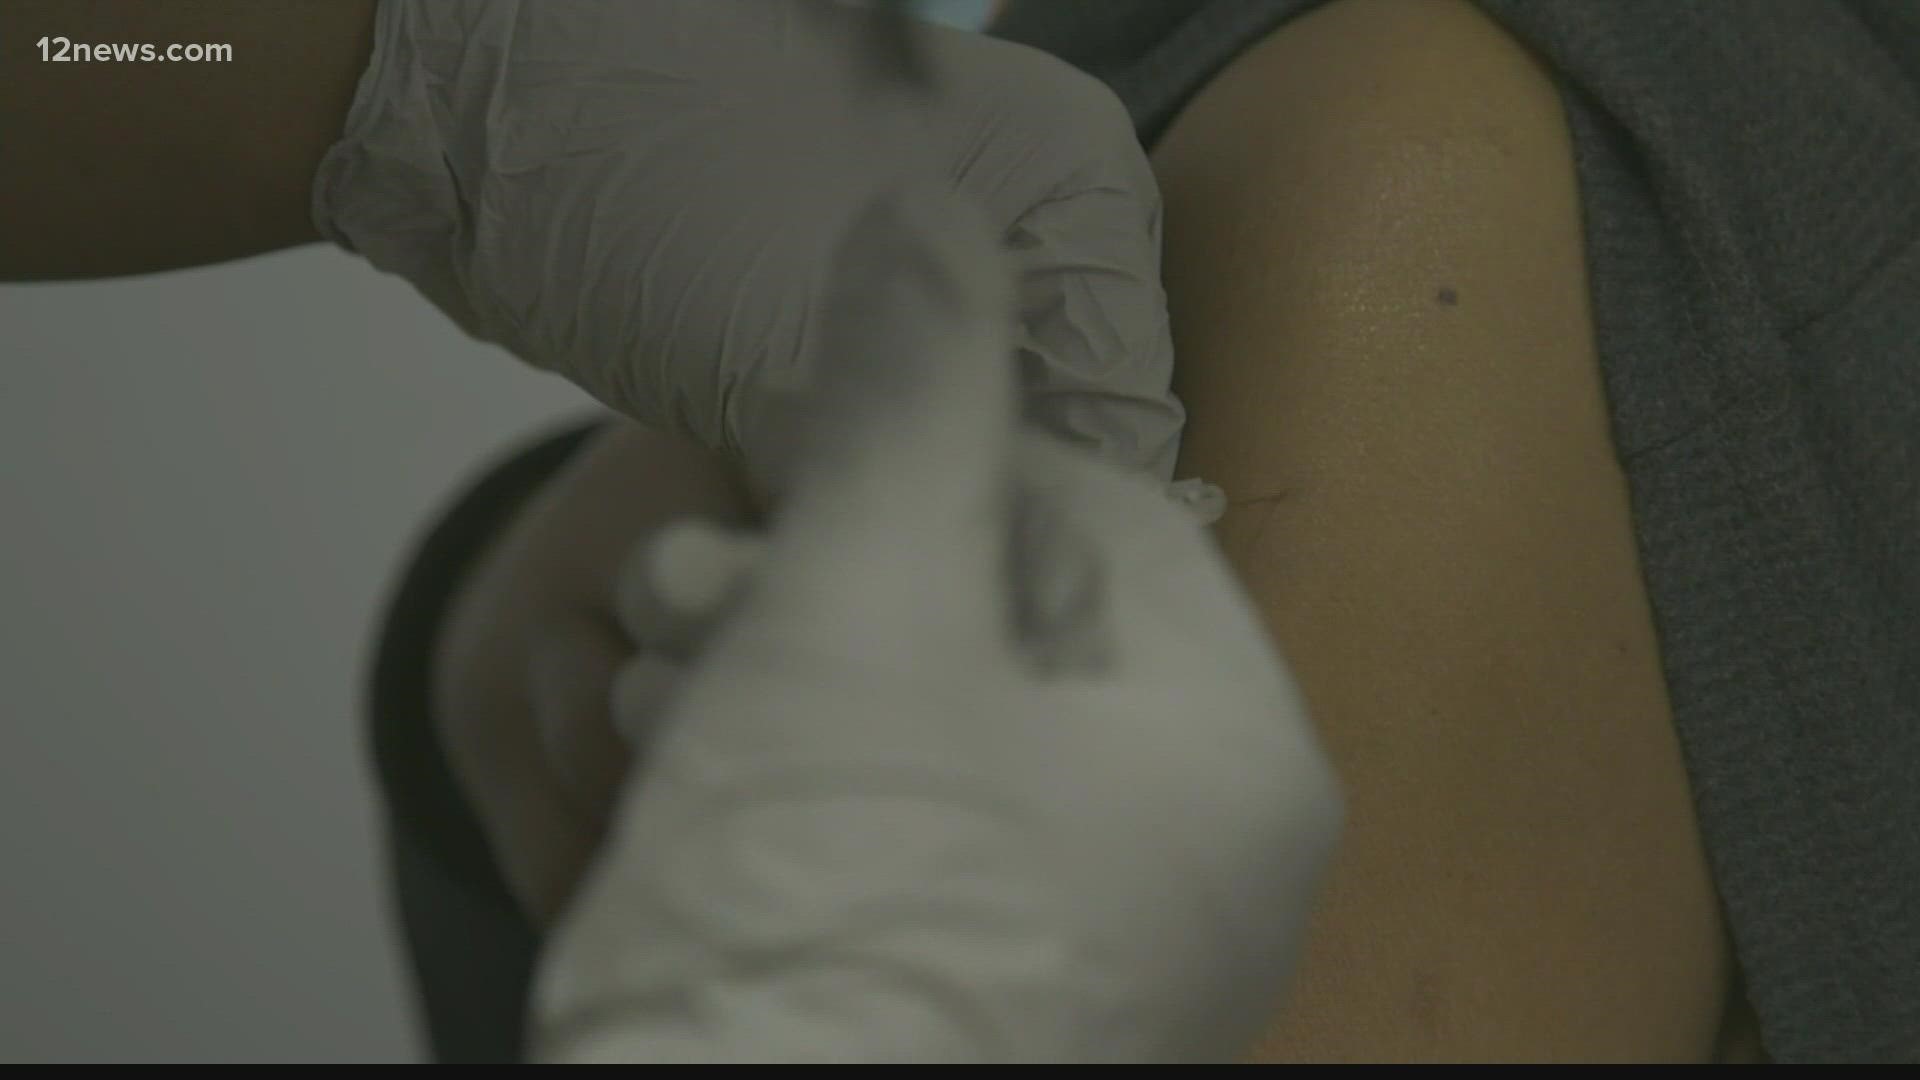 The city of Phoenix's 14,000 employees have two months to be fully vaccinated against the coronavirus or risk getting terminated.